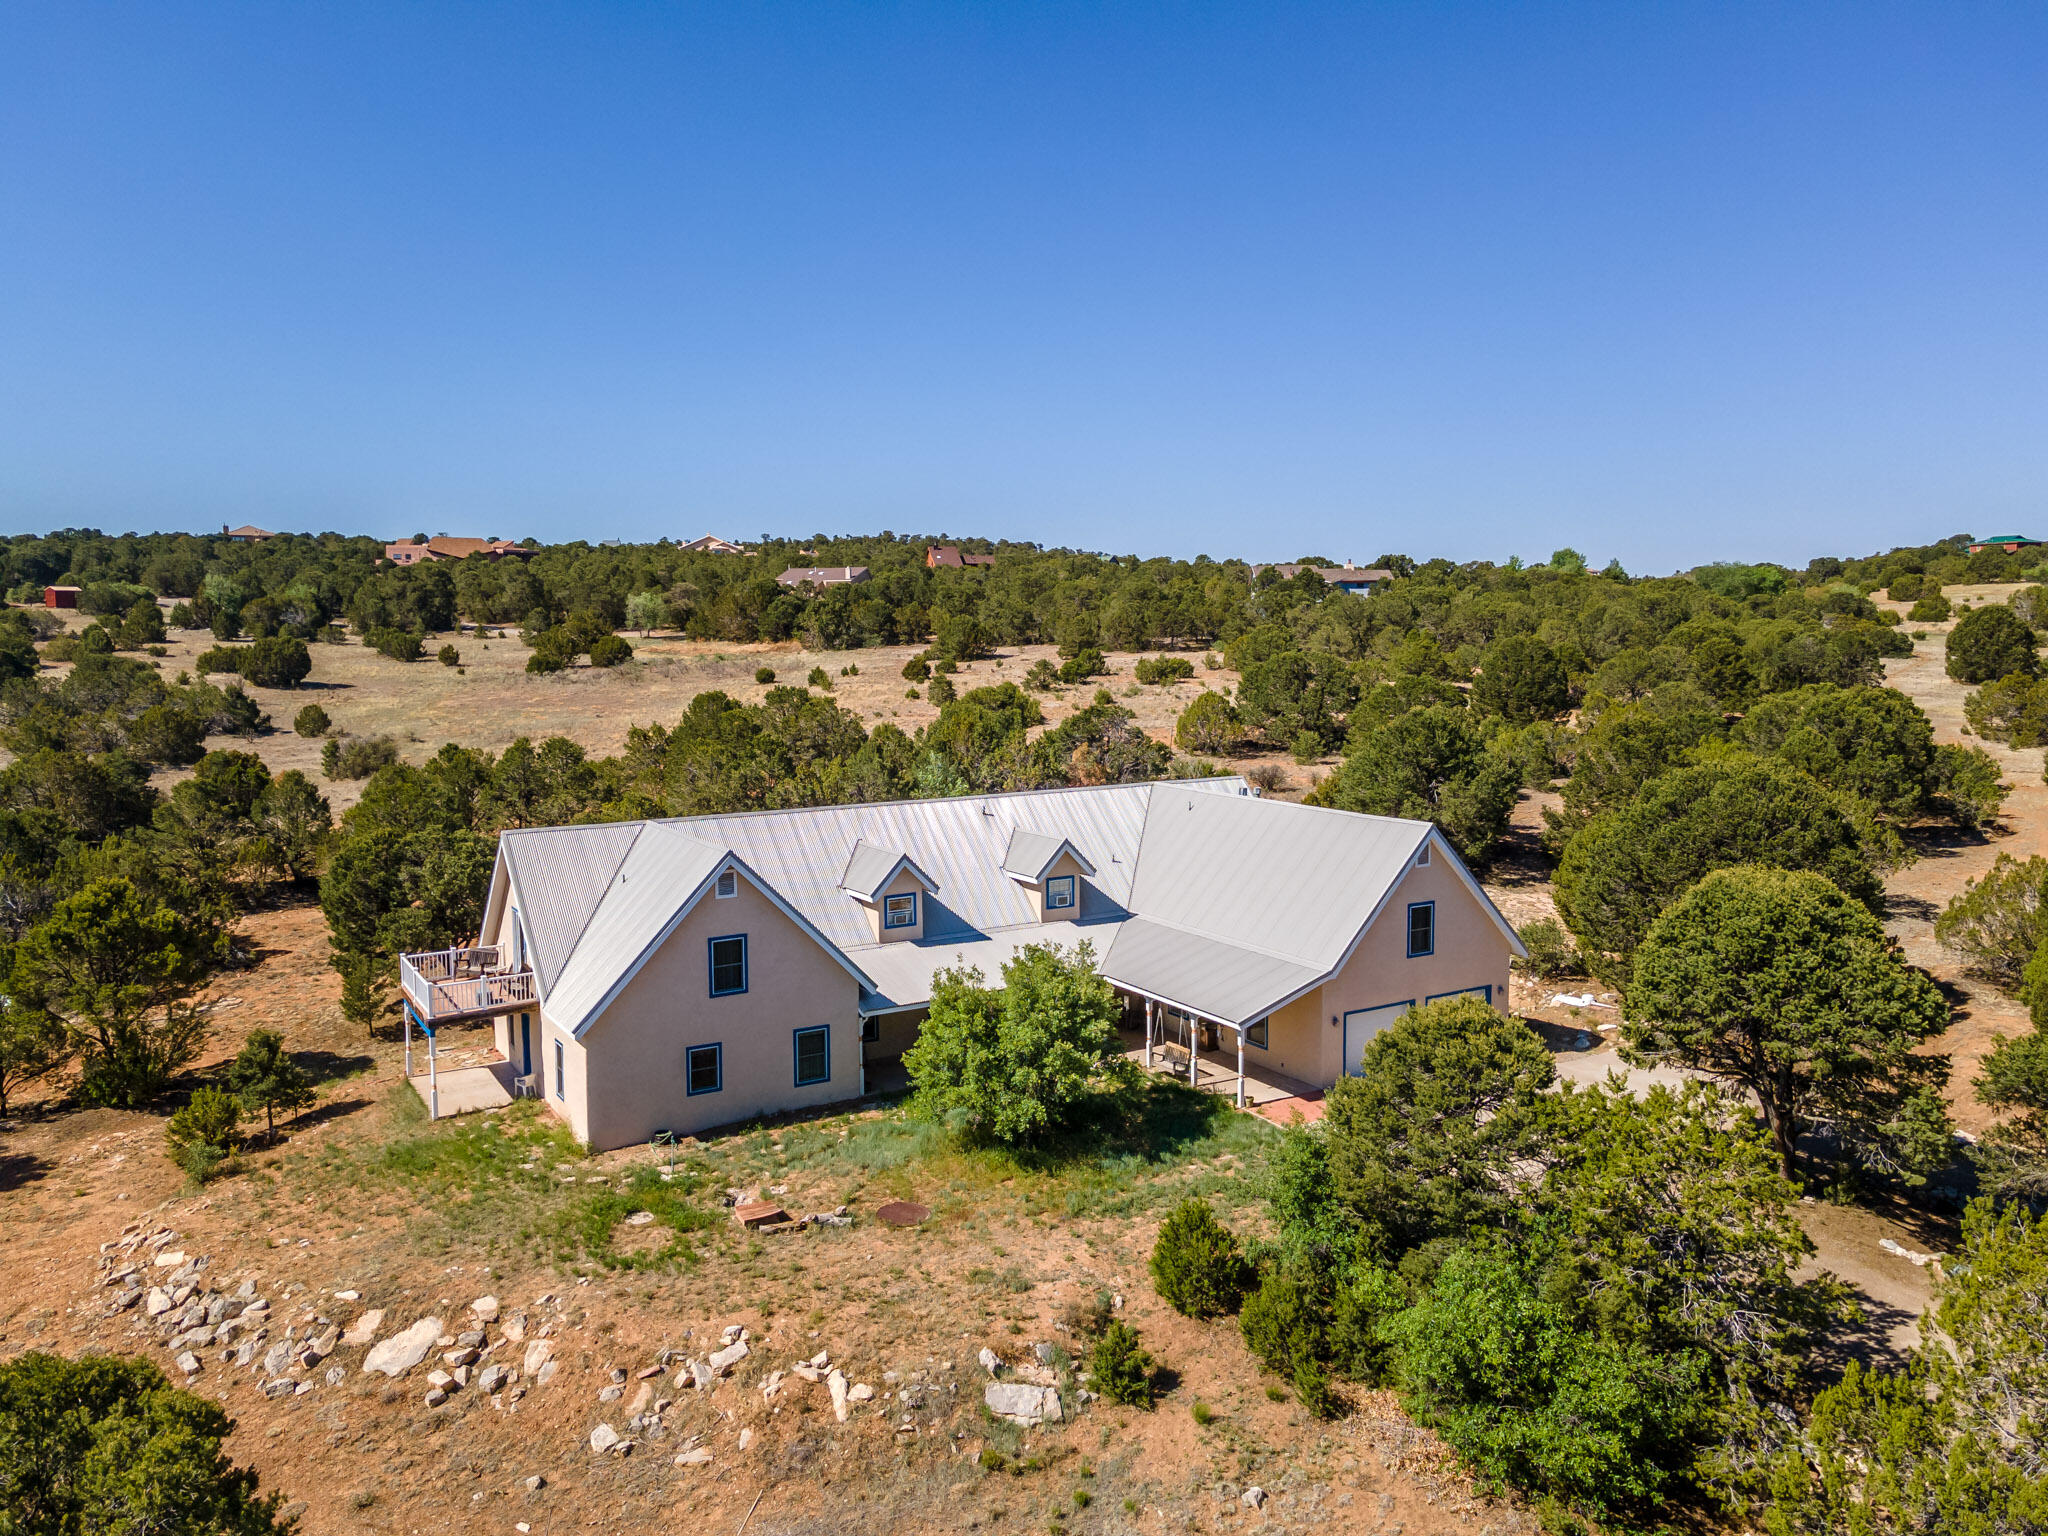 This lovely, private home on over 3 acres in gated Vista de Manana is the best buy you can get in the luxury communities around Tijeras! New stucco, plumbing and upgraded septic system in 2021, new roof in 2019; plus it's listed at over ** $100,000 below** the most recent appraisal.  Water provided by Entranosa and a smart-meter system. Plus, the charm factor is off the charts: kitchen with butcher block counters and beadboard backsplash, custom cabinetry, Talavera bathroom sinks, deep window sills for your herbs and plants, Pella wood windows. Two luxurious en-suite bedrooms on the lower level, plus two (or more!) bedrooms upstairs, with options for painting, writing, home theater, studio, games, gym, guest quarters, classroom. So many possibilities! Experience rainstorms from...